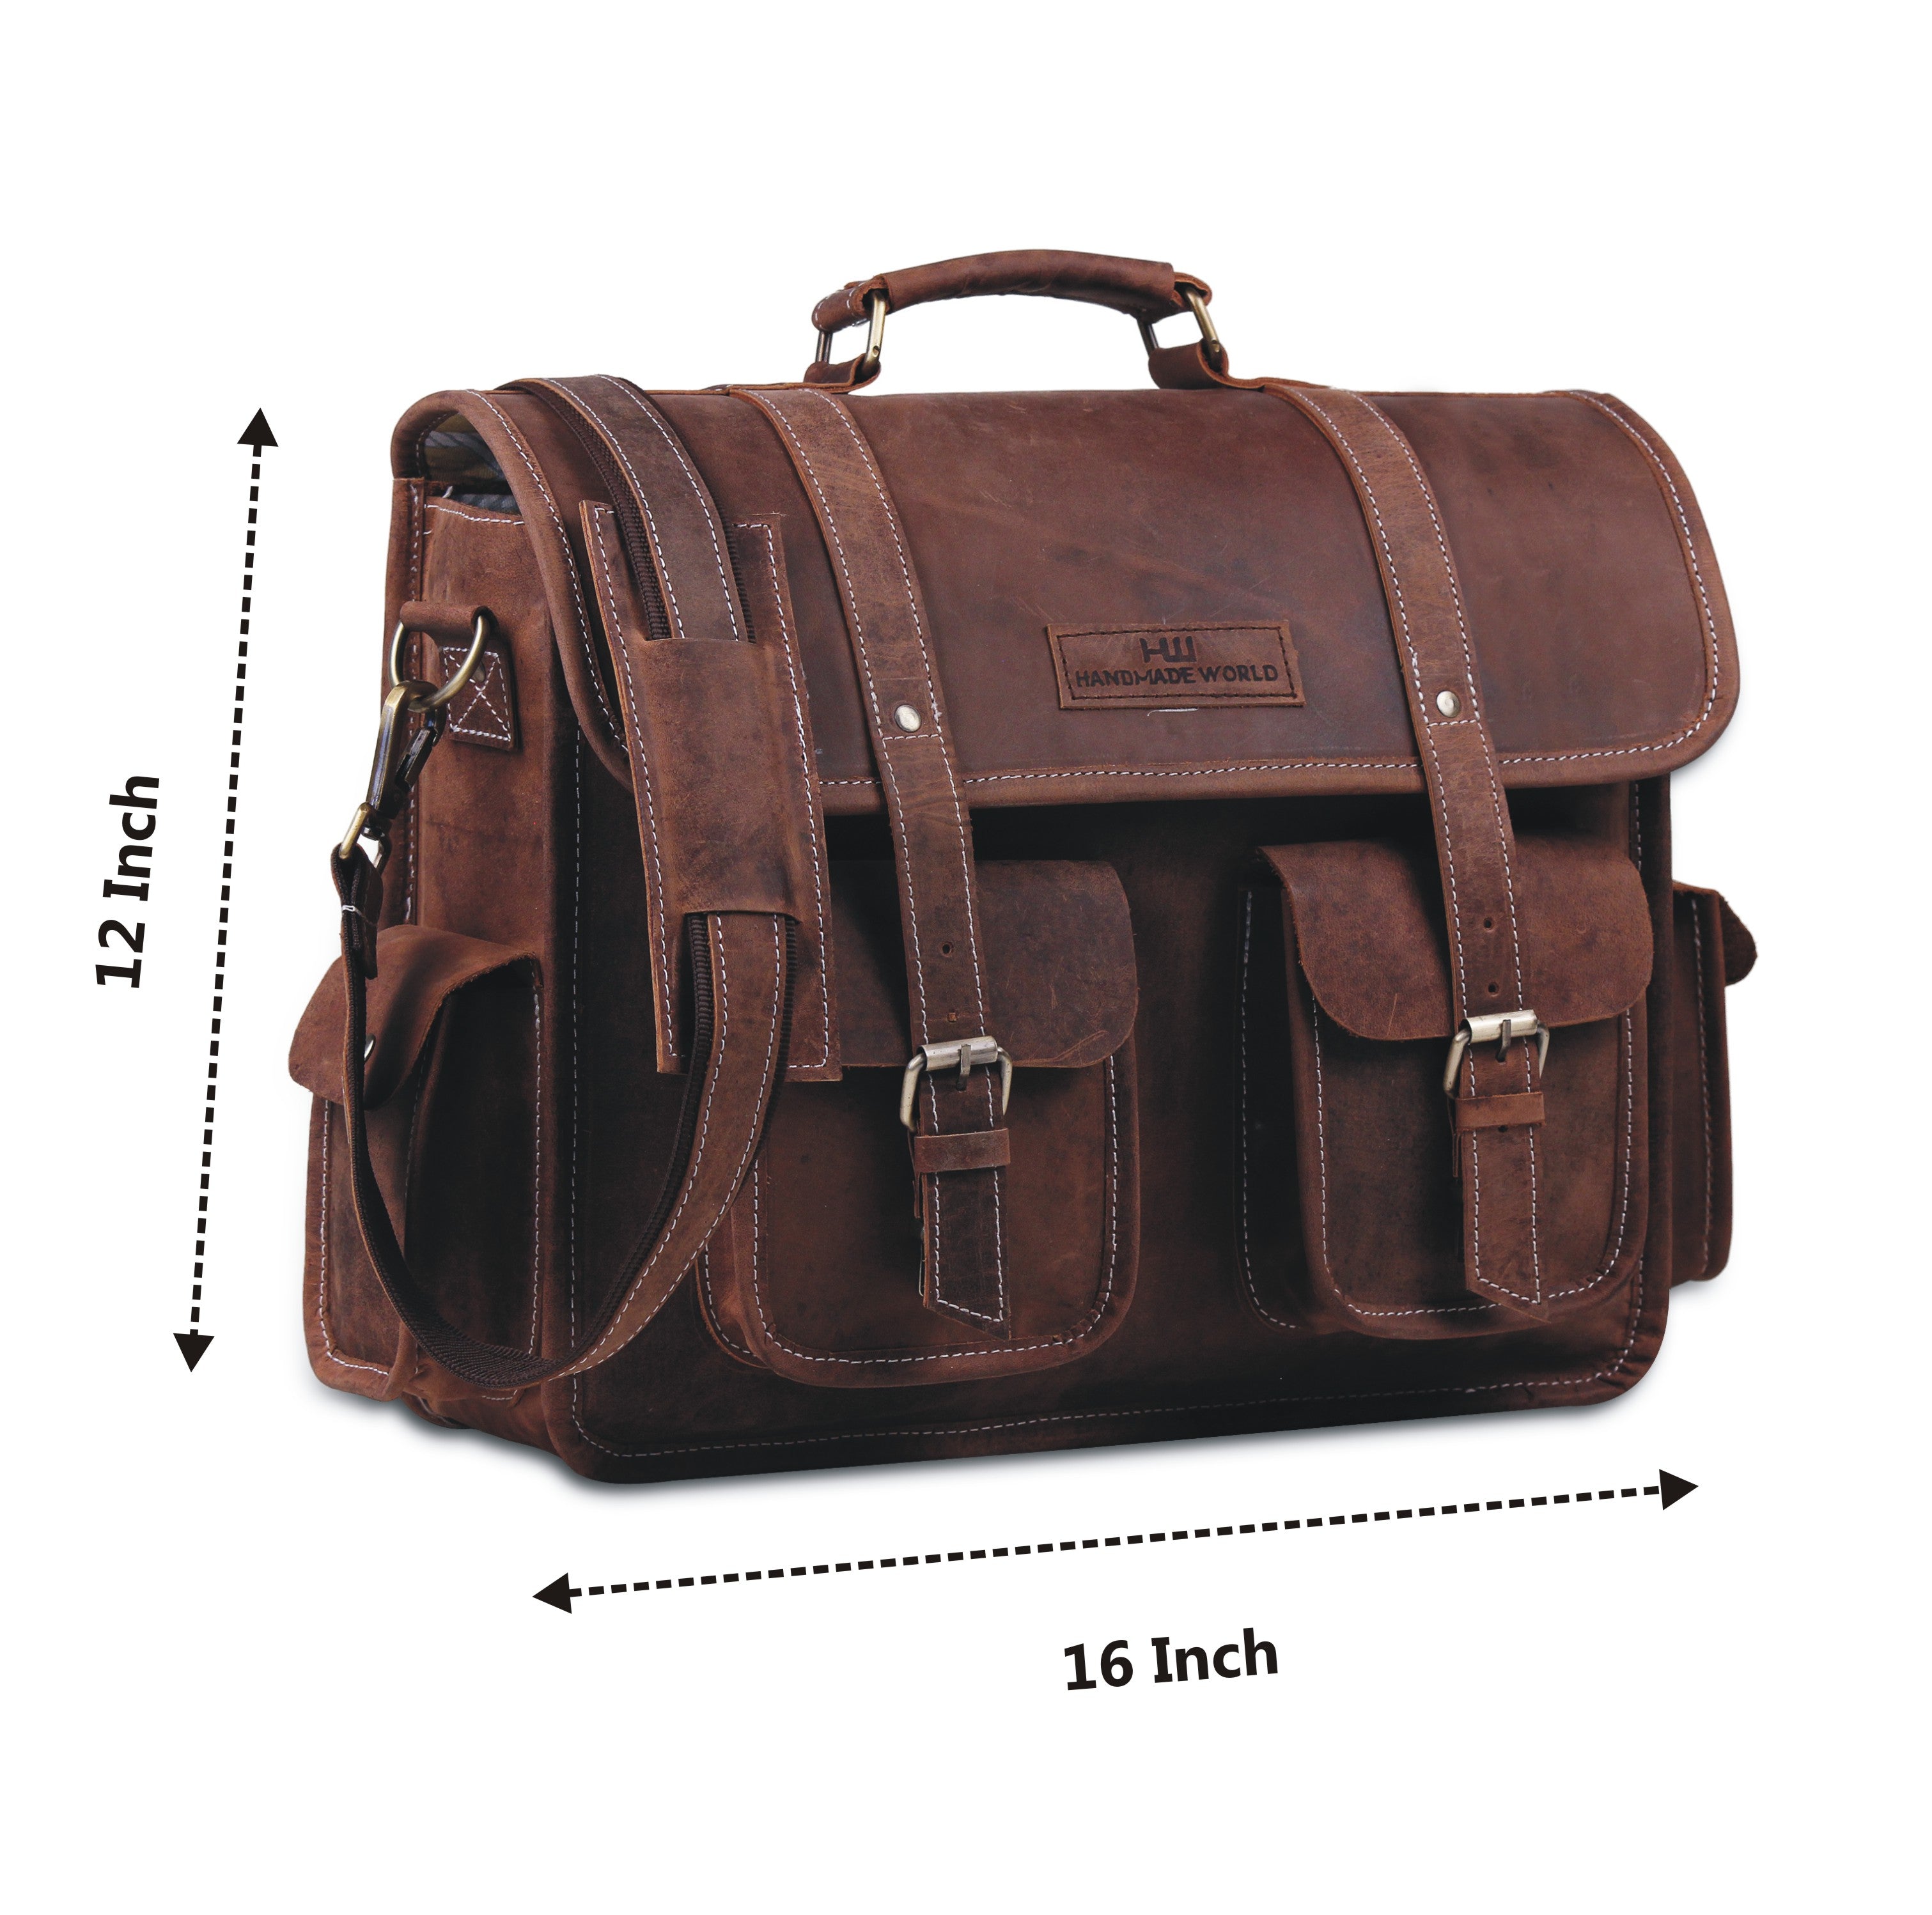 16 inch Buffalo Leather Briefcase Bag by Hulsh